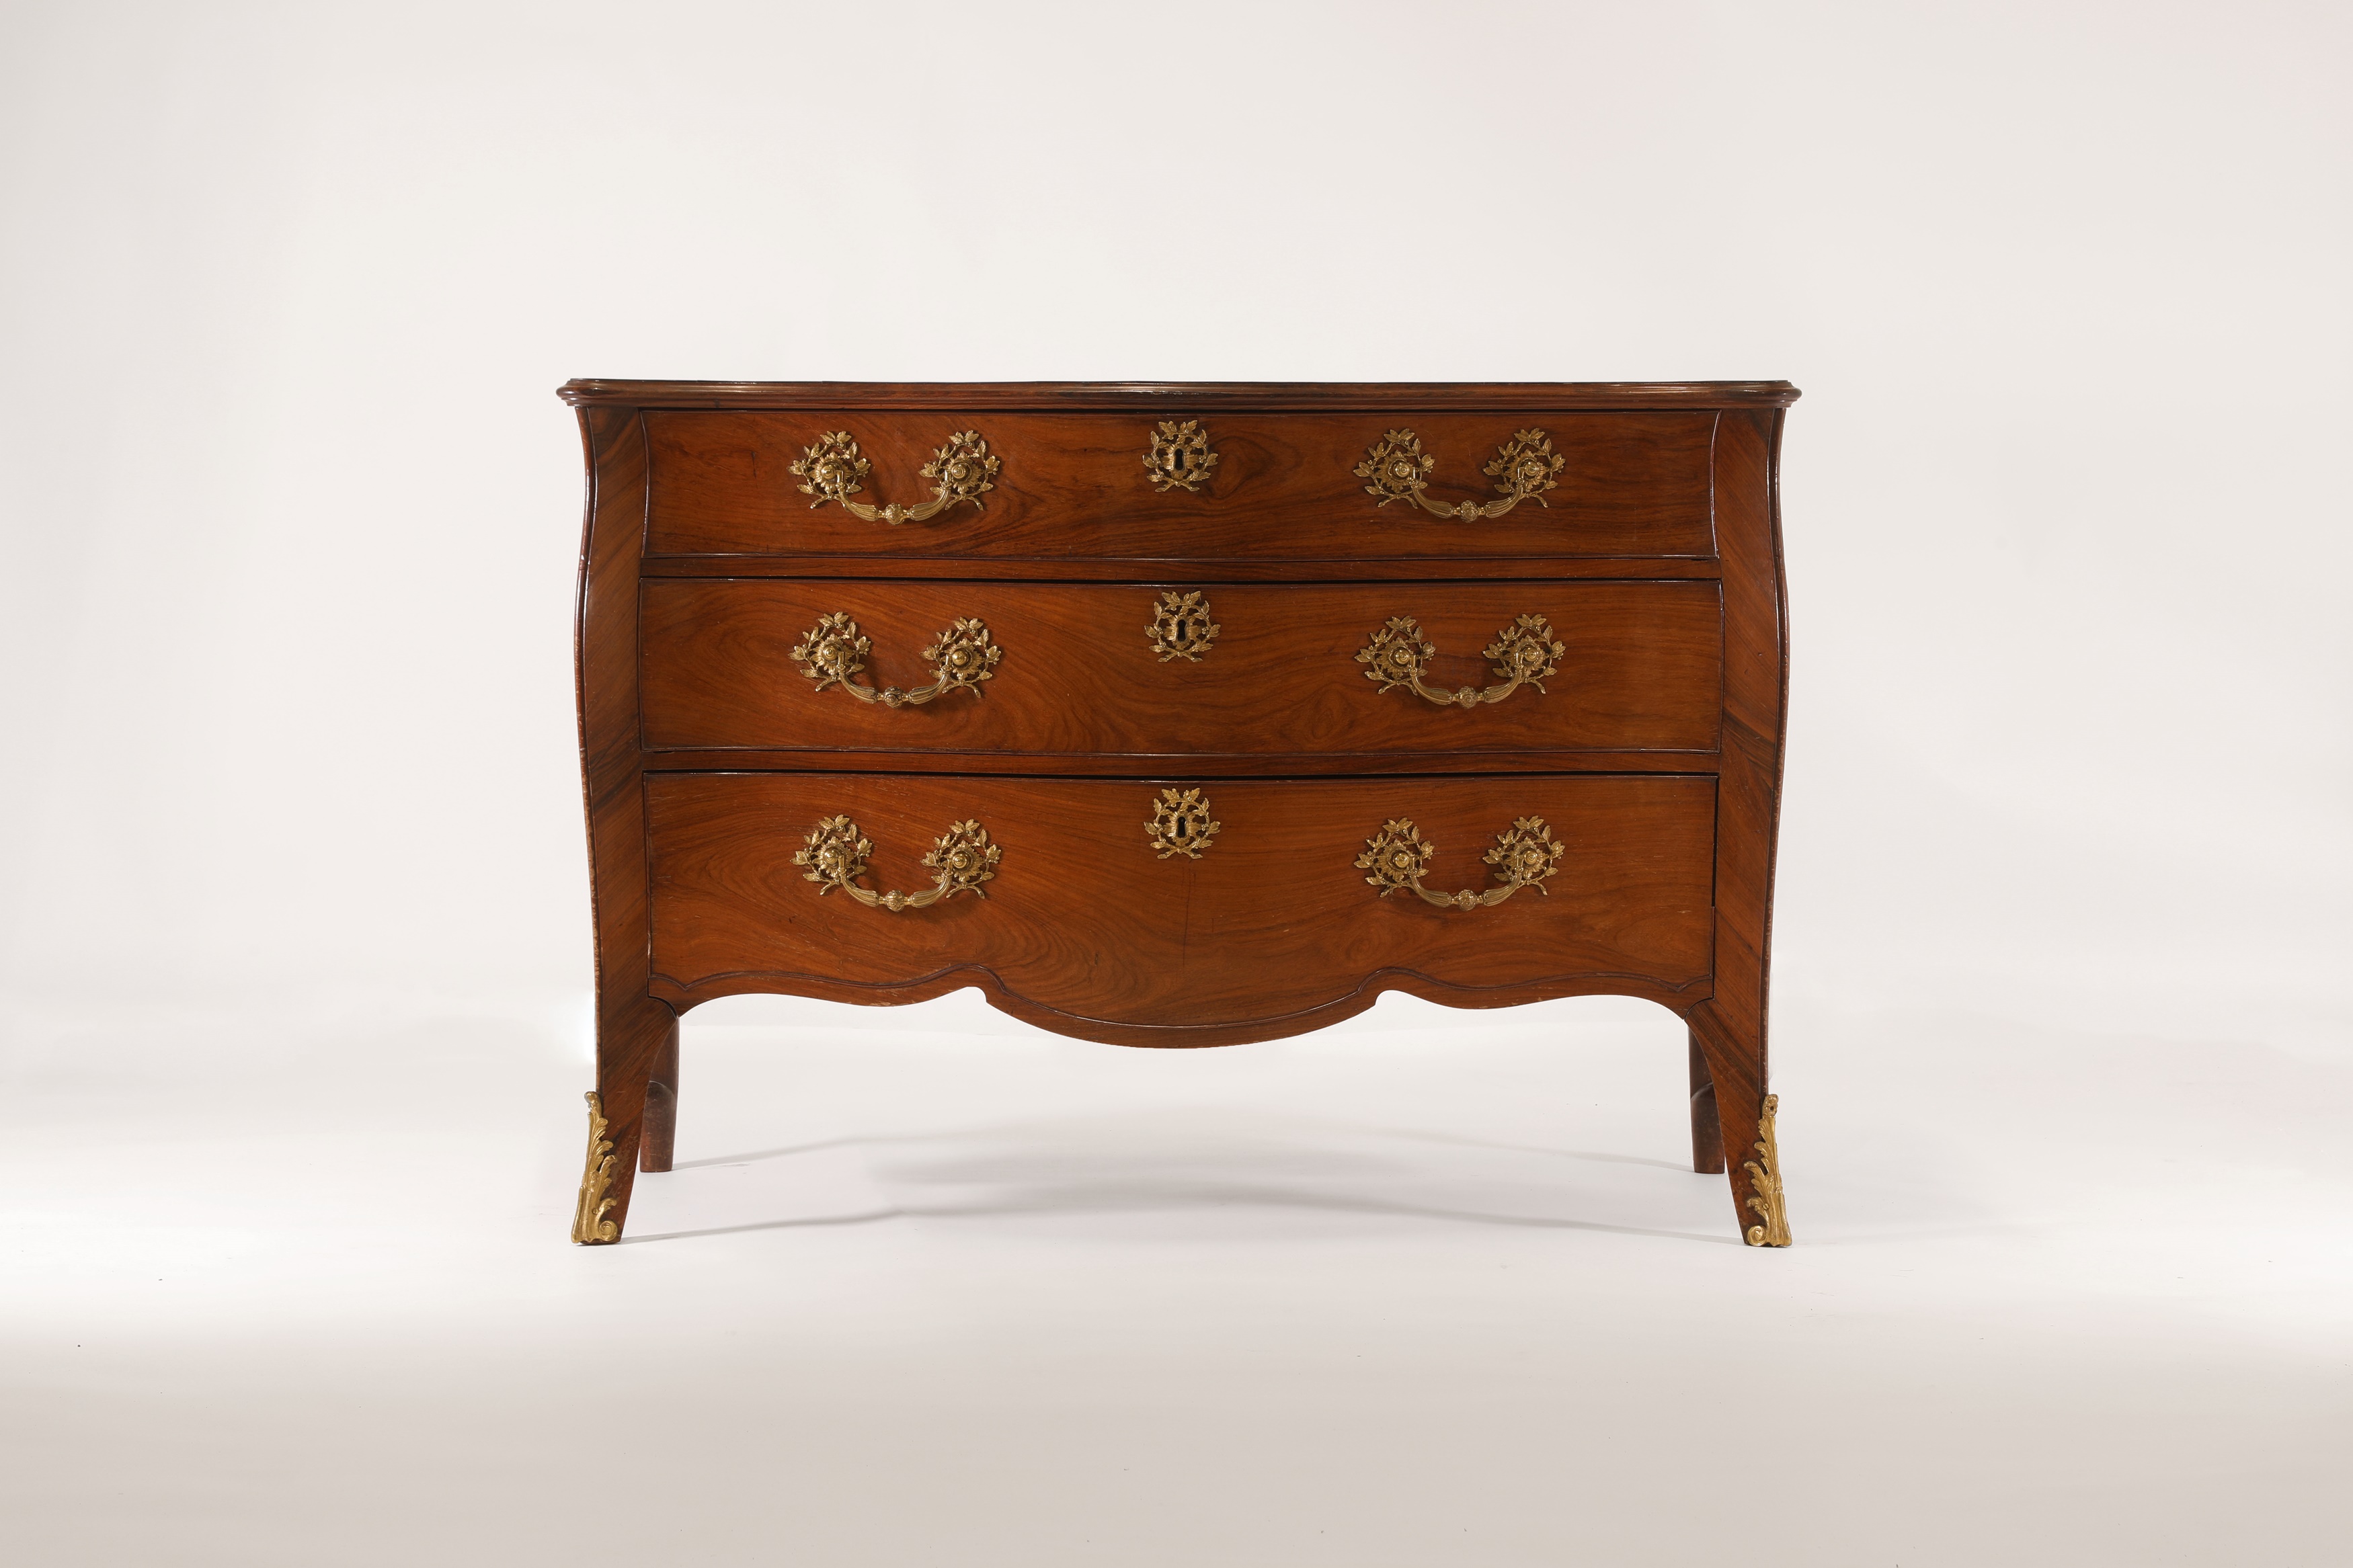 A George III padouk and kingwood commode attributed to John Cobb, c.1765, of serpentine outline with ormolu mounts, the matched-veneered top with a crossbanded moulded edge above three long cockbeaded drawers mounted with laurel wreath and reeded bail handles, with conforming escutcheons and carry handles to the sides above a wavy edge apron, on splayed forelegs terminating in foliate-cast sabots, 125cm wide 65cm deep 88cm high (£30,000-50,000)